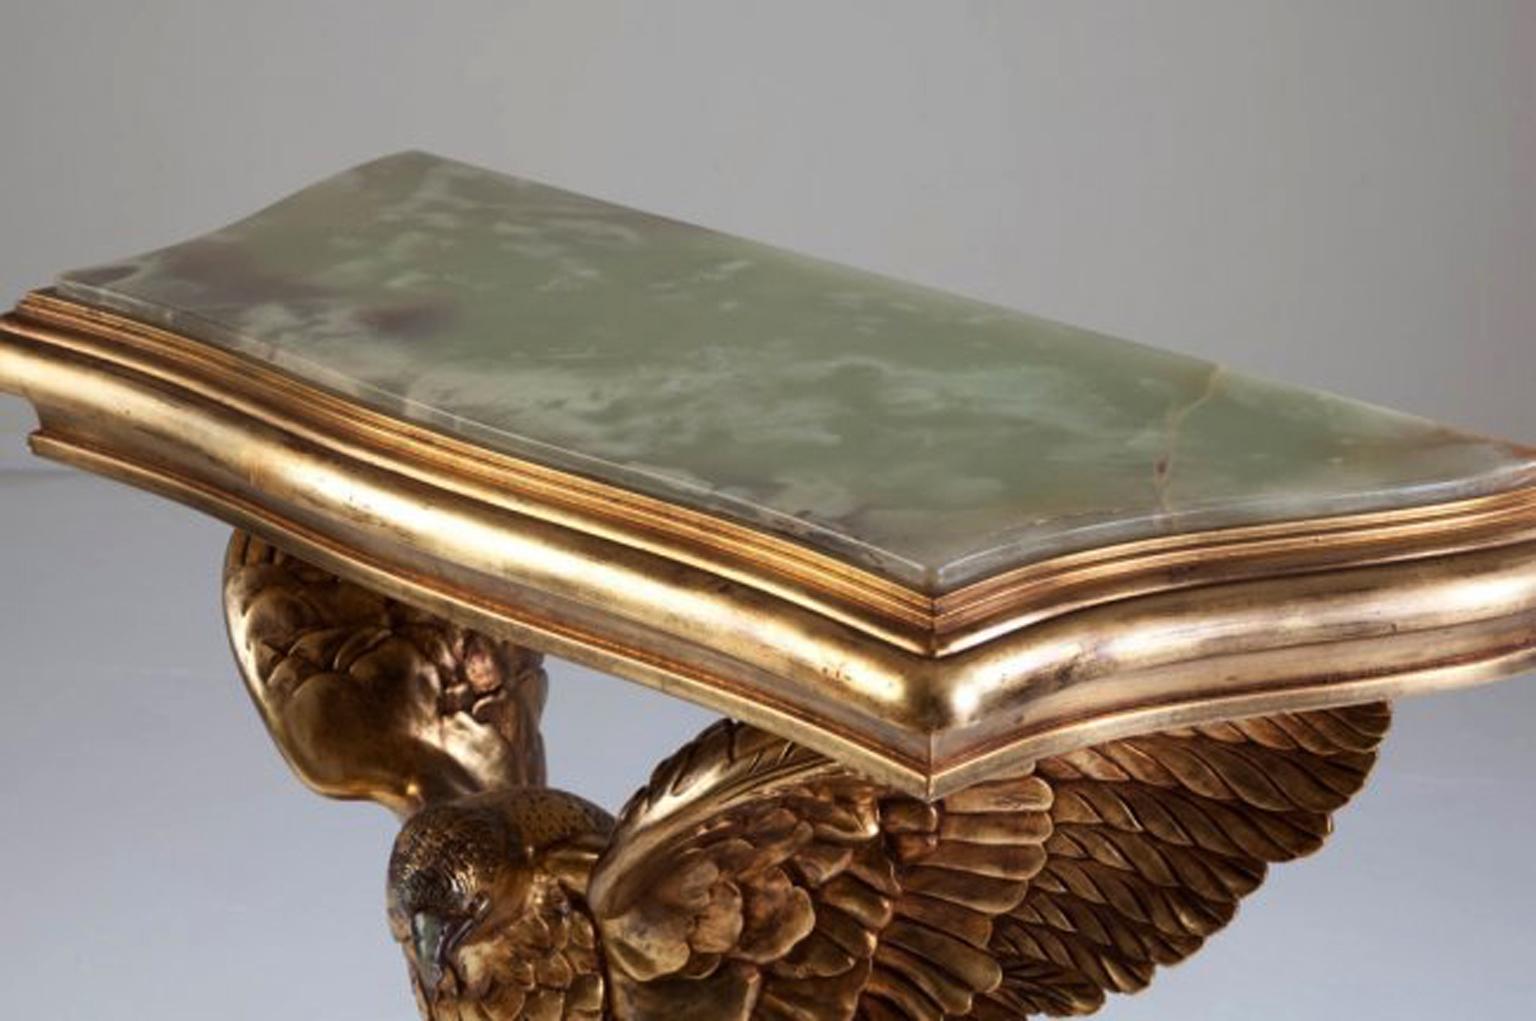 English Giltwood and Onyx Console Table (Englisch)